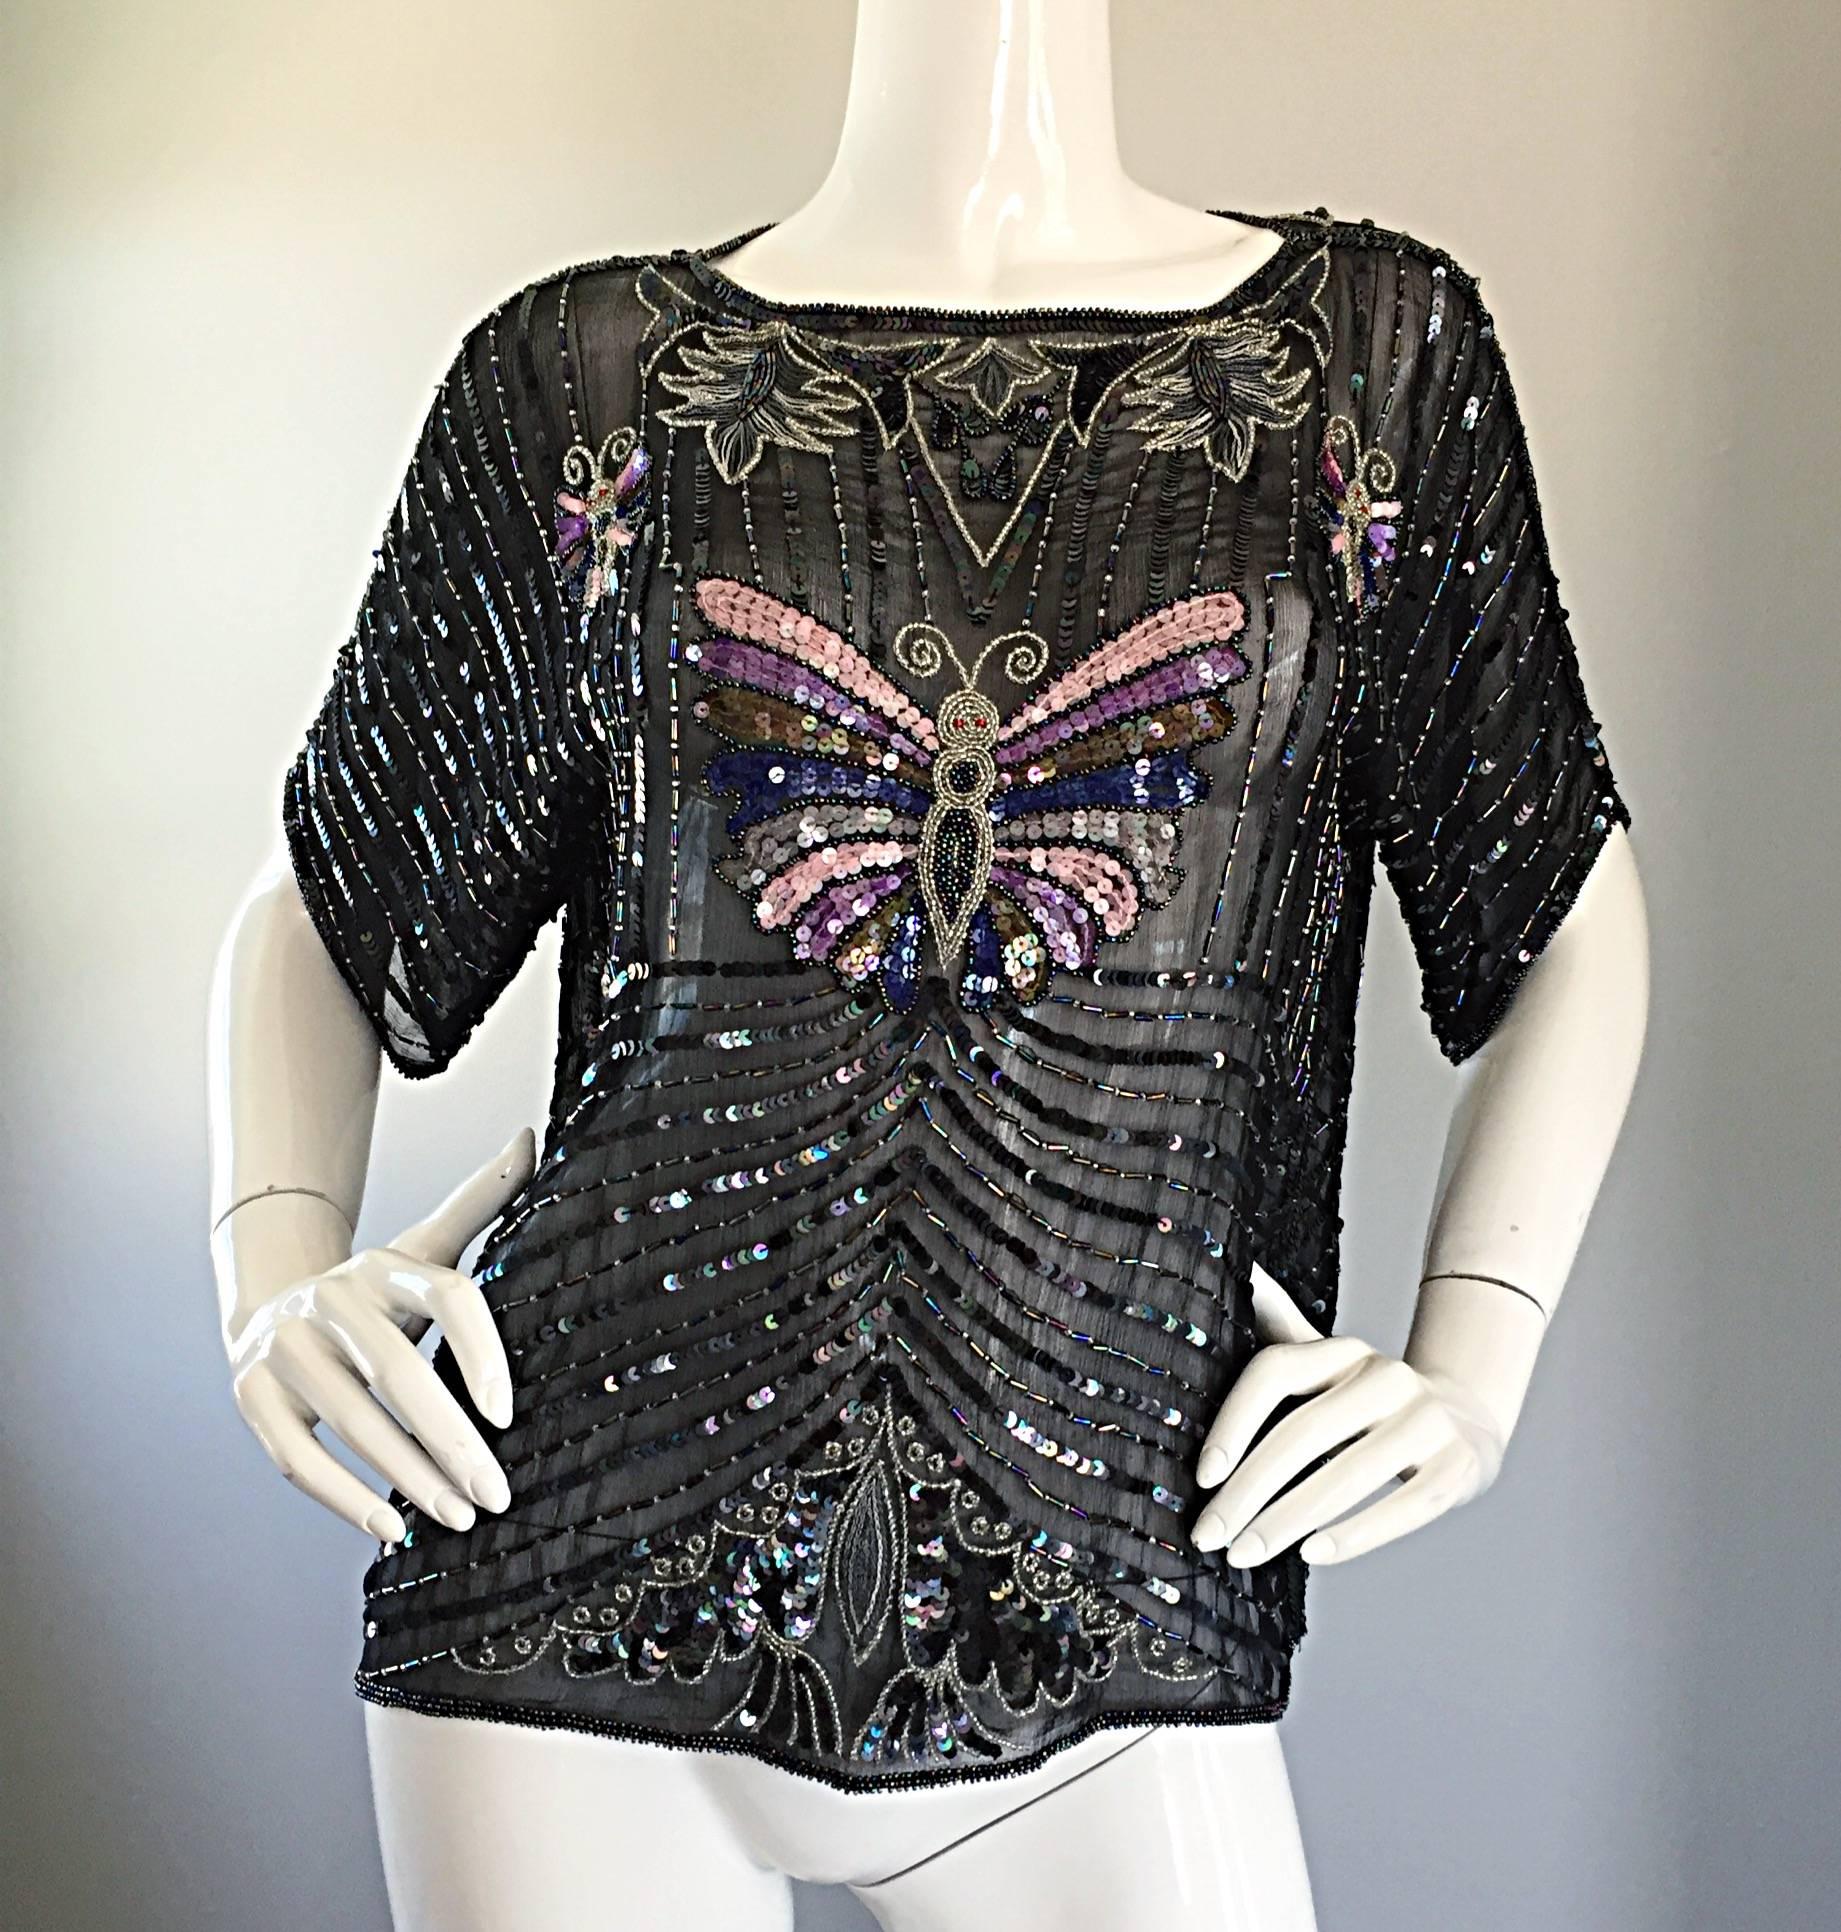 Amazing and rare vintage JEANETTE KASTENBERG for ST MARTIN black silk beaded and sequin butterfly top! Features thousands of hand-sewn sequins and beads throughout the entire blouse. Semi sheer luxuriously soft silk. Slouchy fitted look can work for